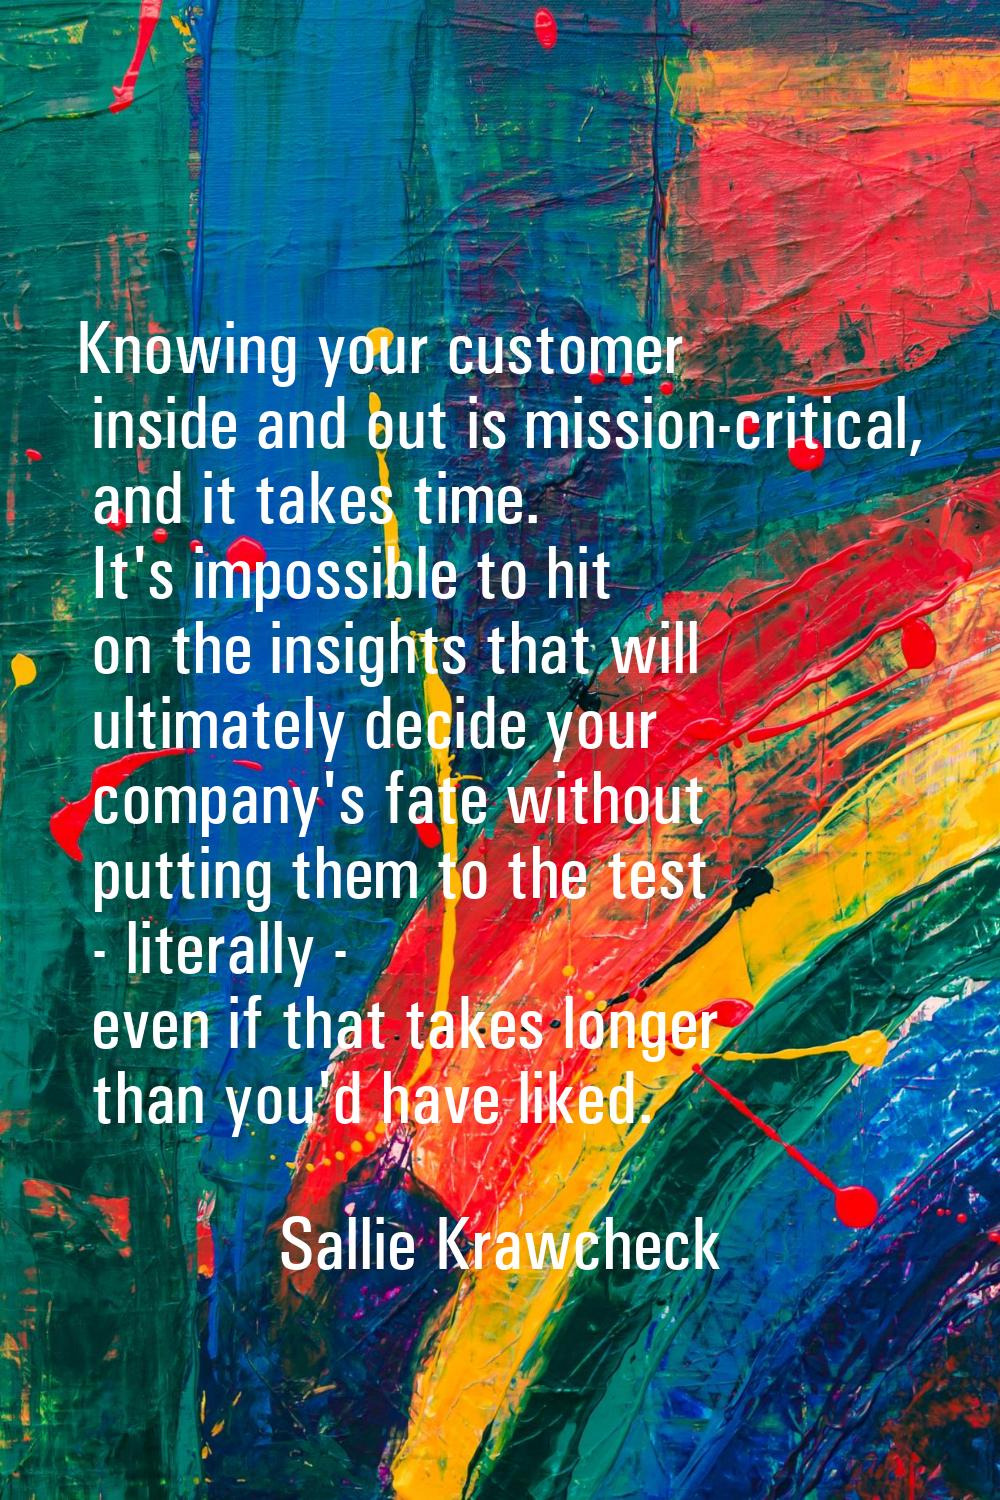 Knowing your customer inside and out is mission-critical, and it takes time. It's impossible to hit